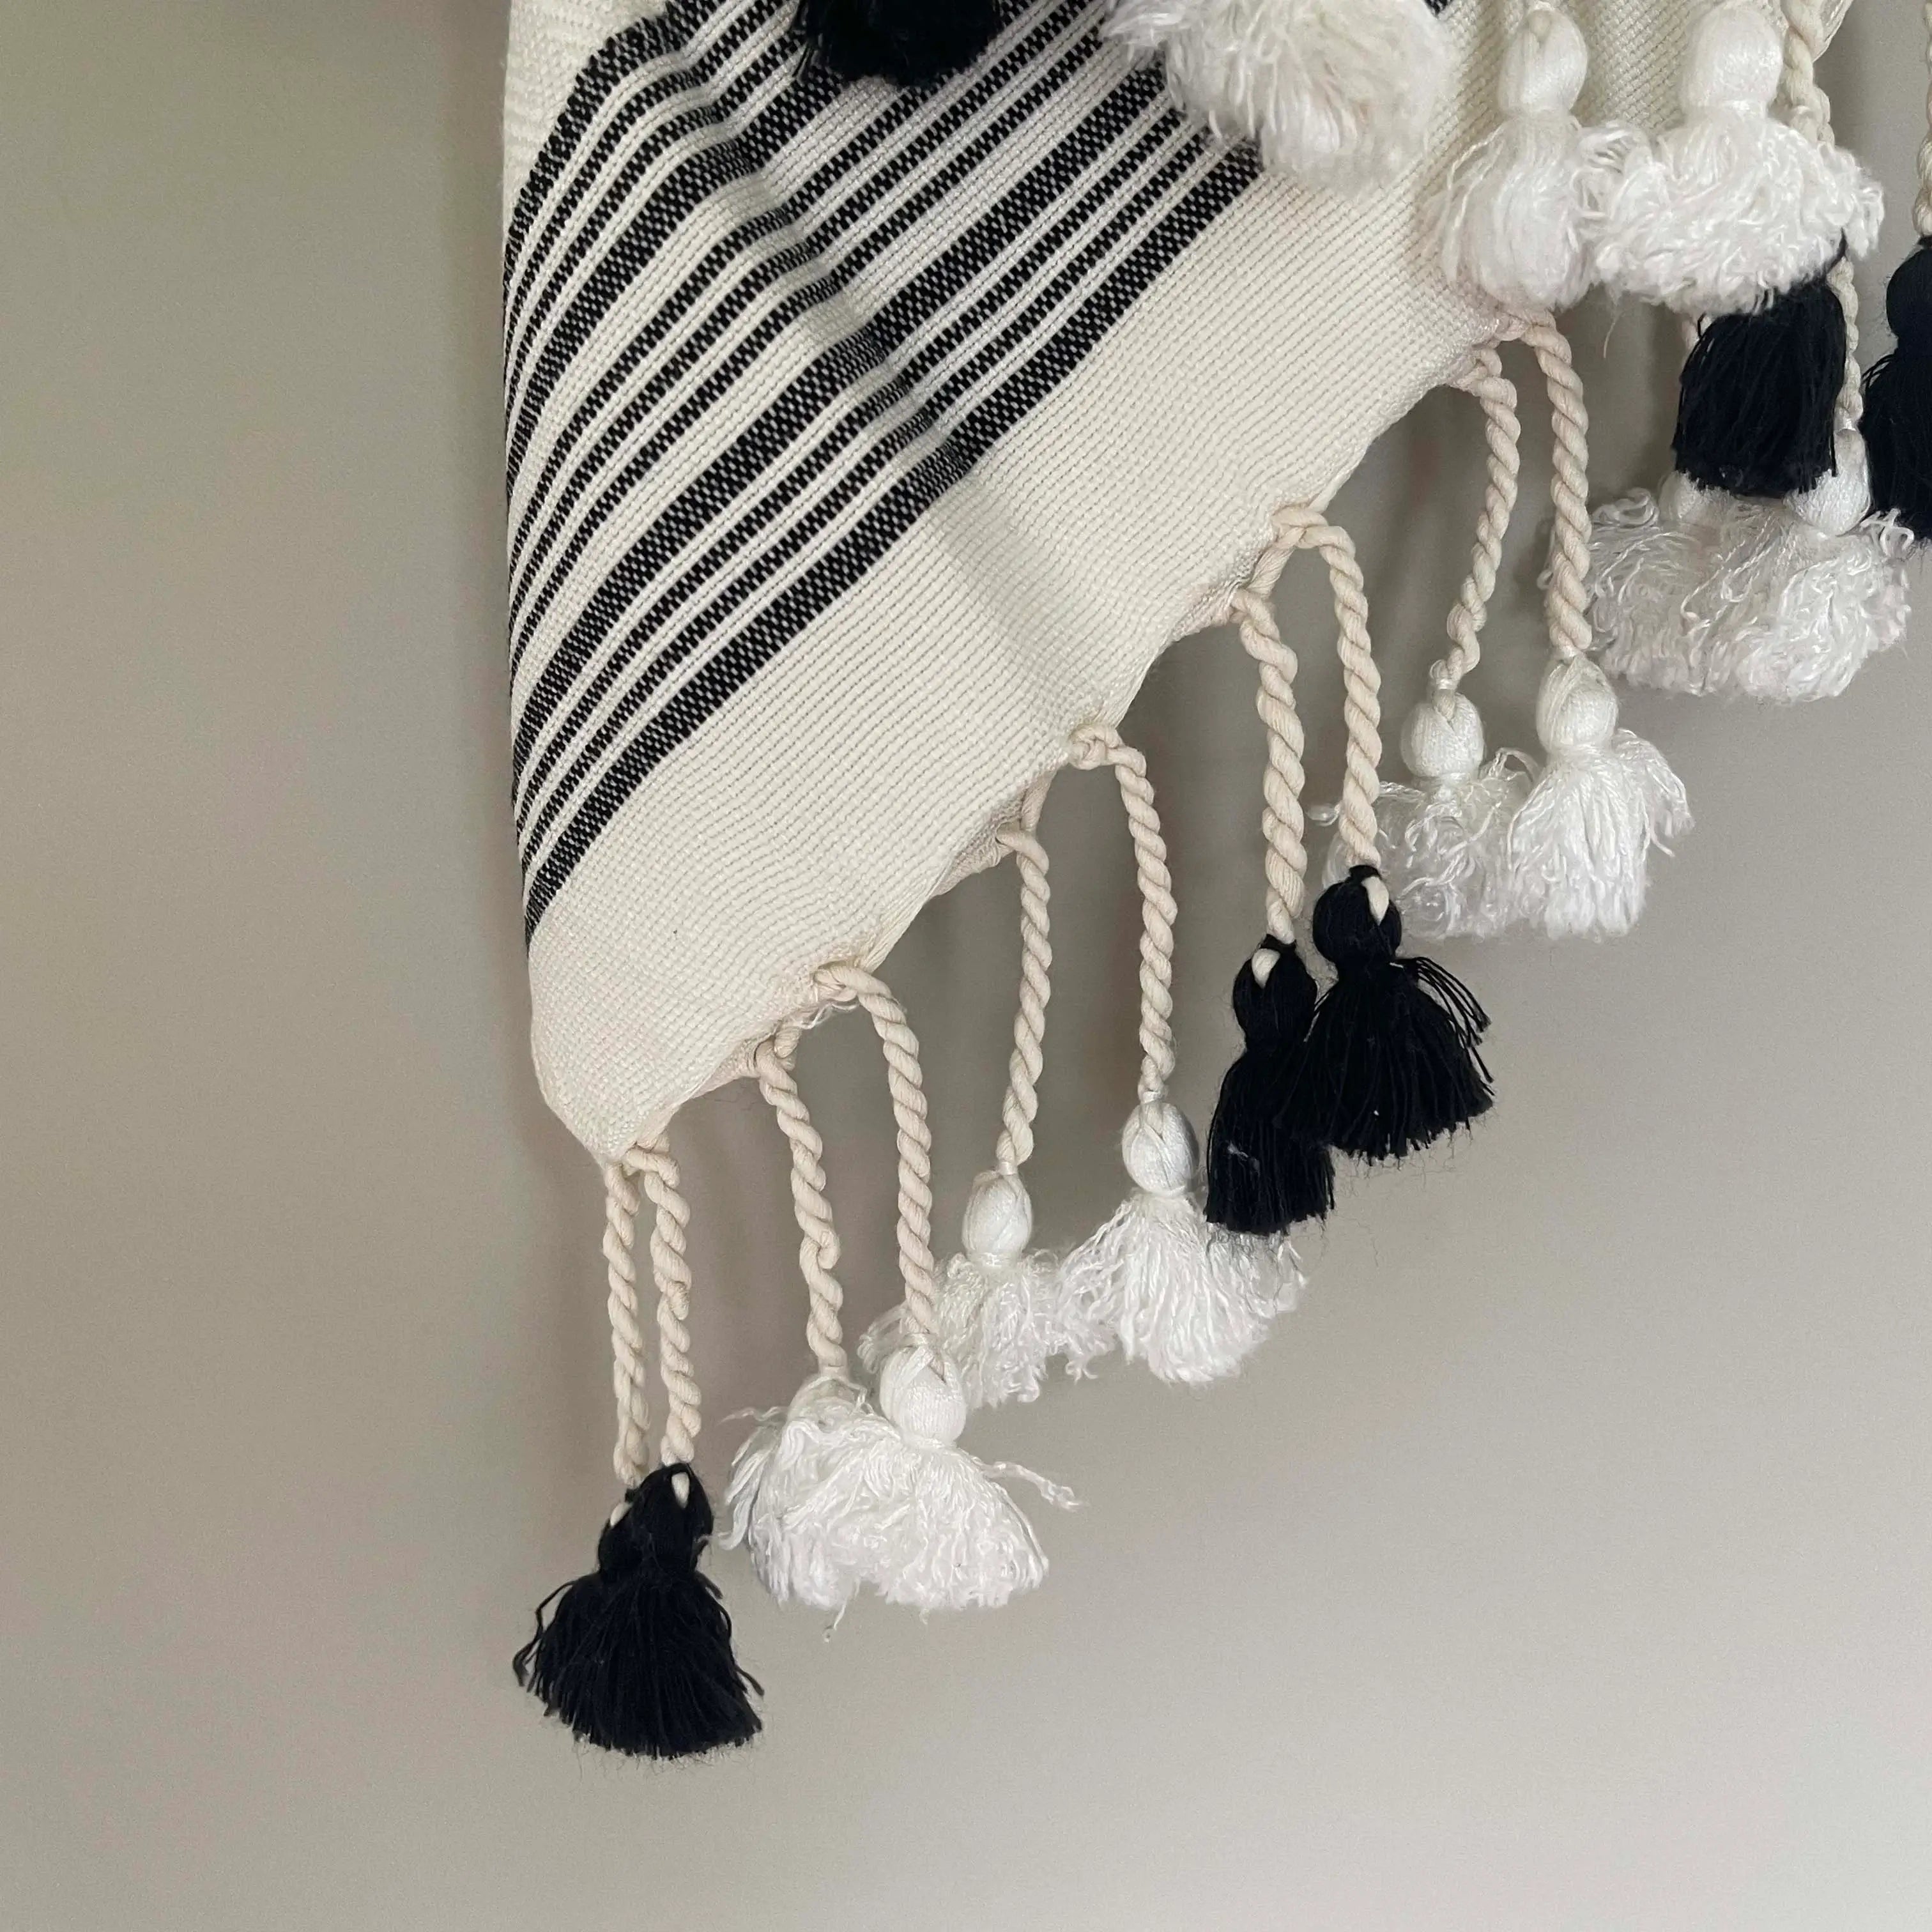 Dounia home Hand towel in Black /Ivory made of Organic cotton/ linen, Model: feya, Close Up View